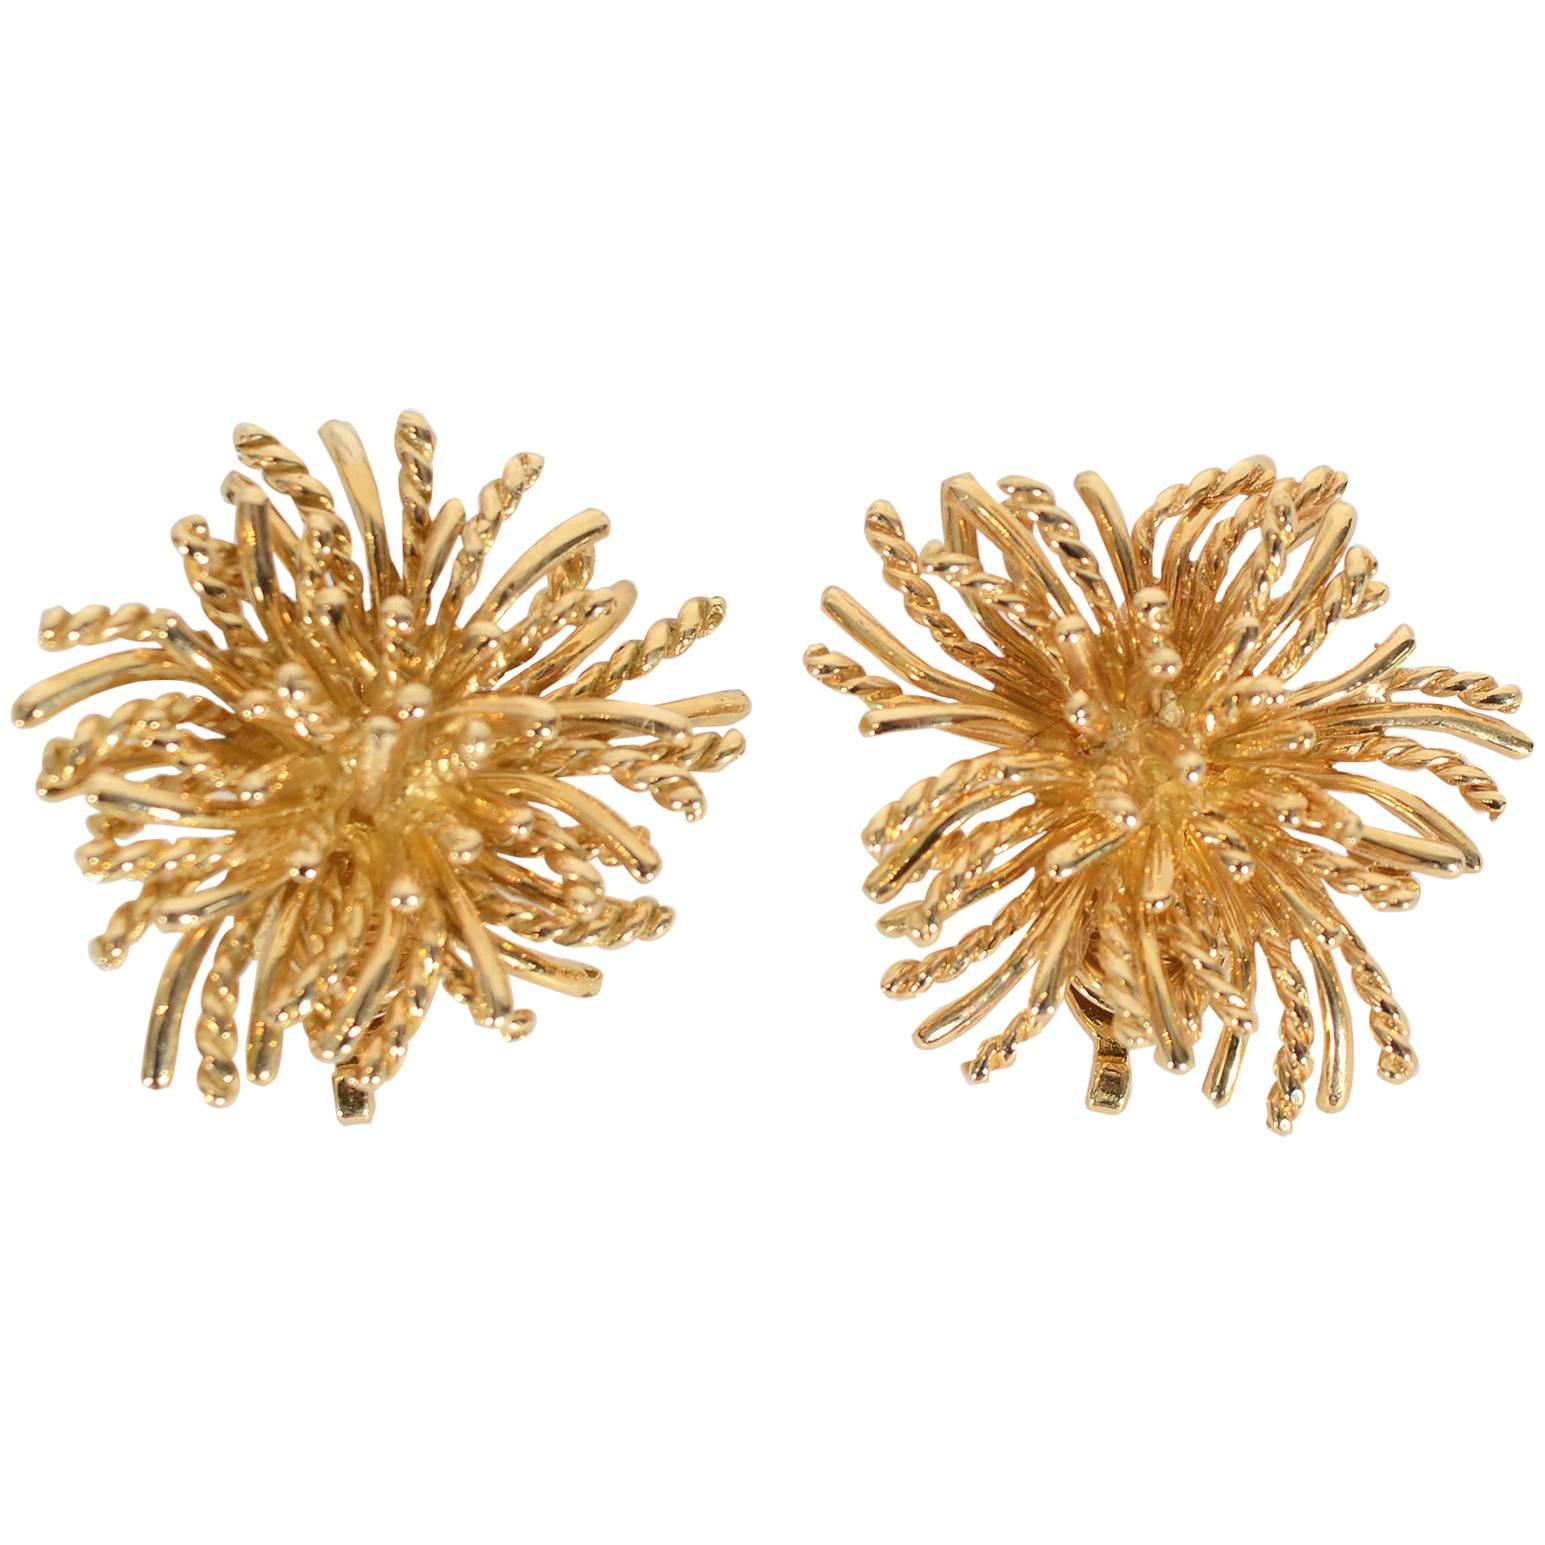 Tiffany & Co. Anemone Gold Earclips